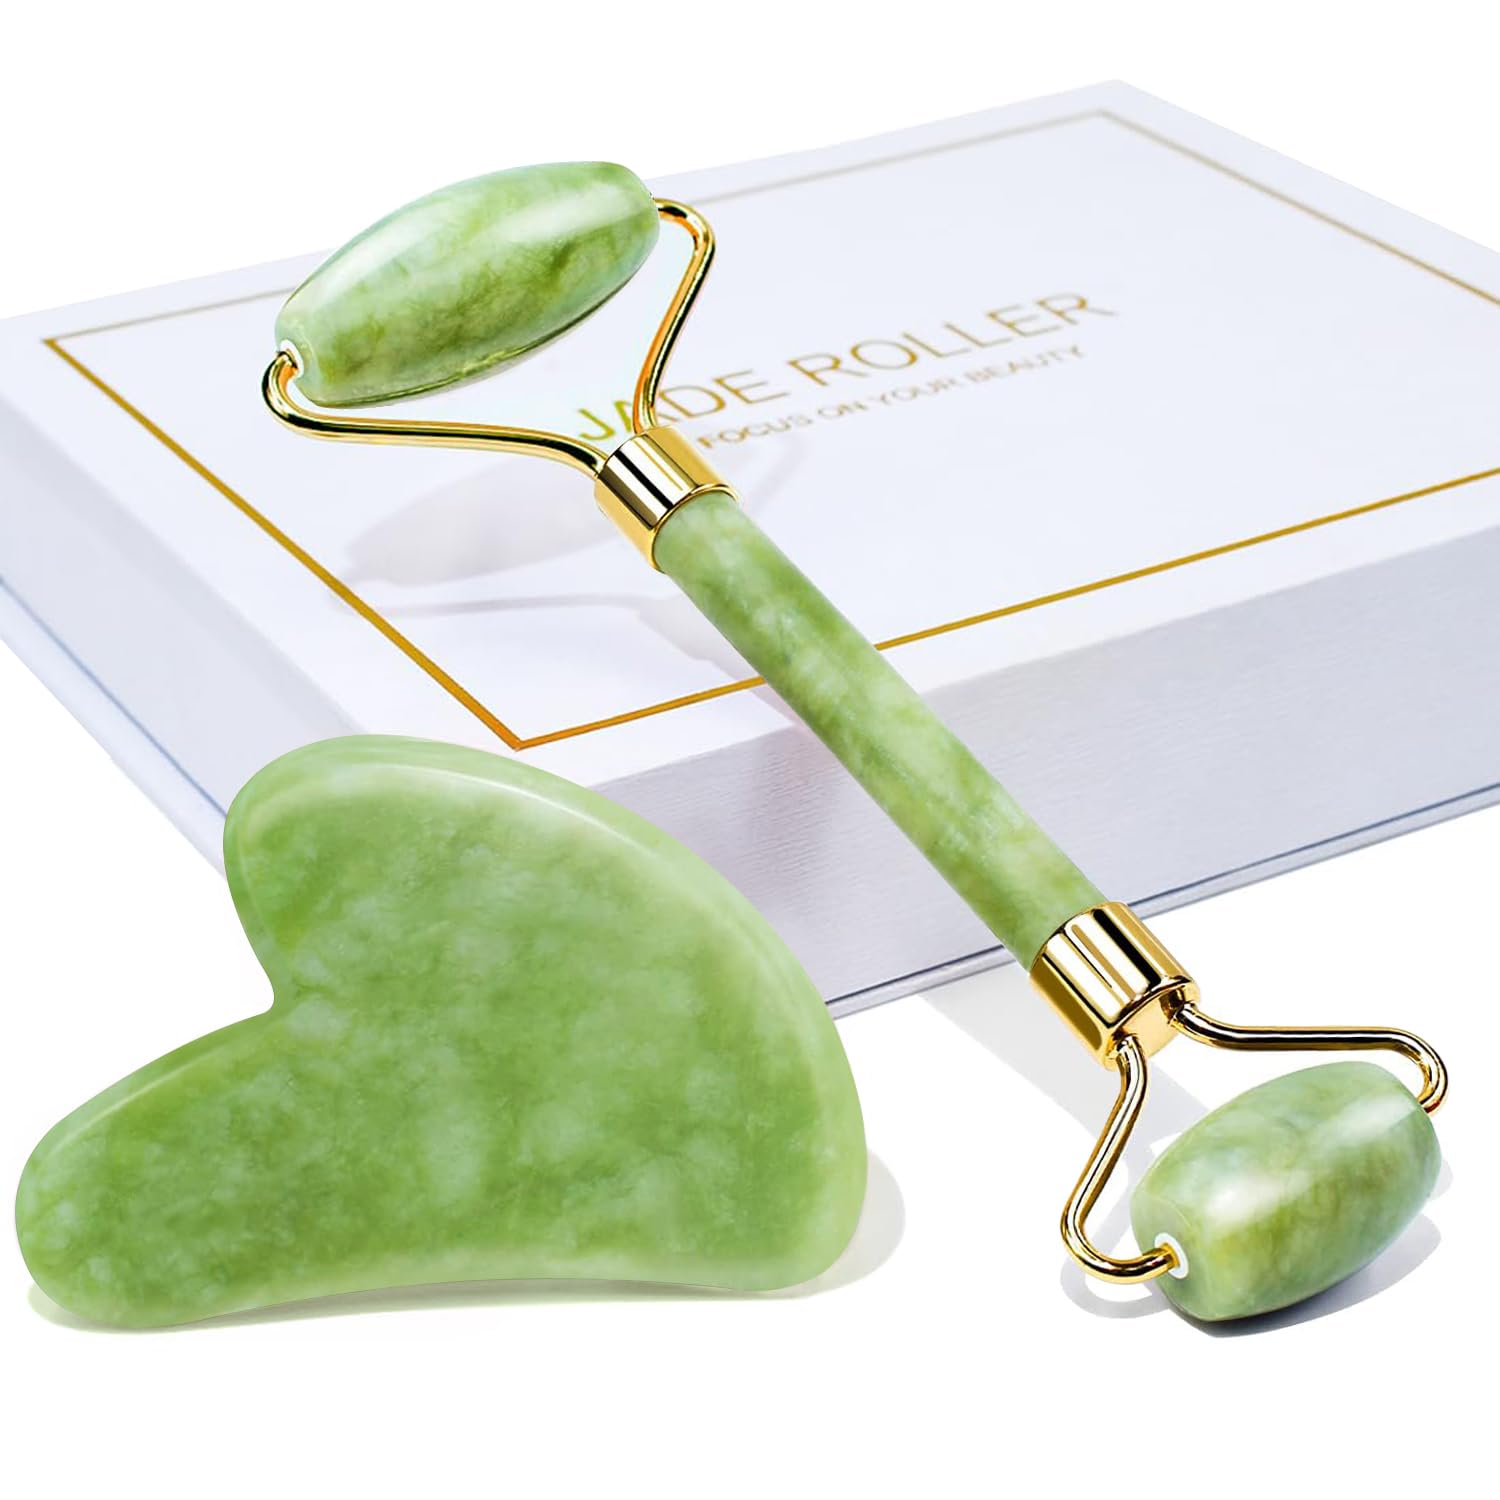 BAIMEI Jade Roller & Gua Sha Facial Tools Face Roller and Gua Sha Set for Skin Care Routine and Puffiness - Green